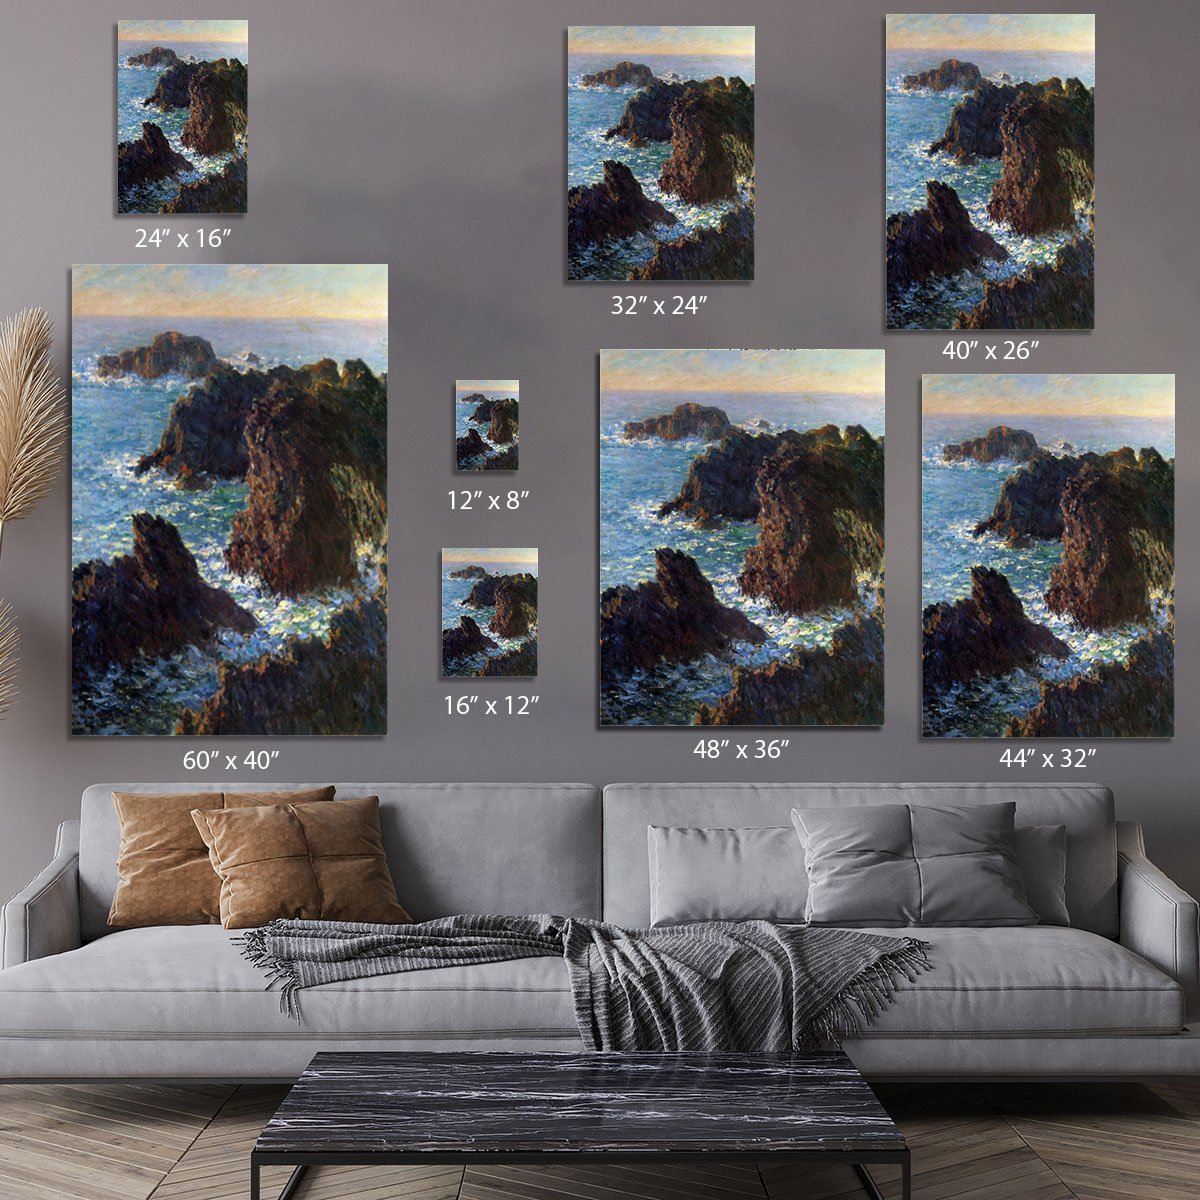 Rocky peaks at the Belle Ile by Monet Canvas Print or Poster